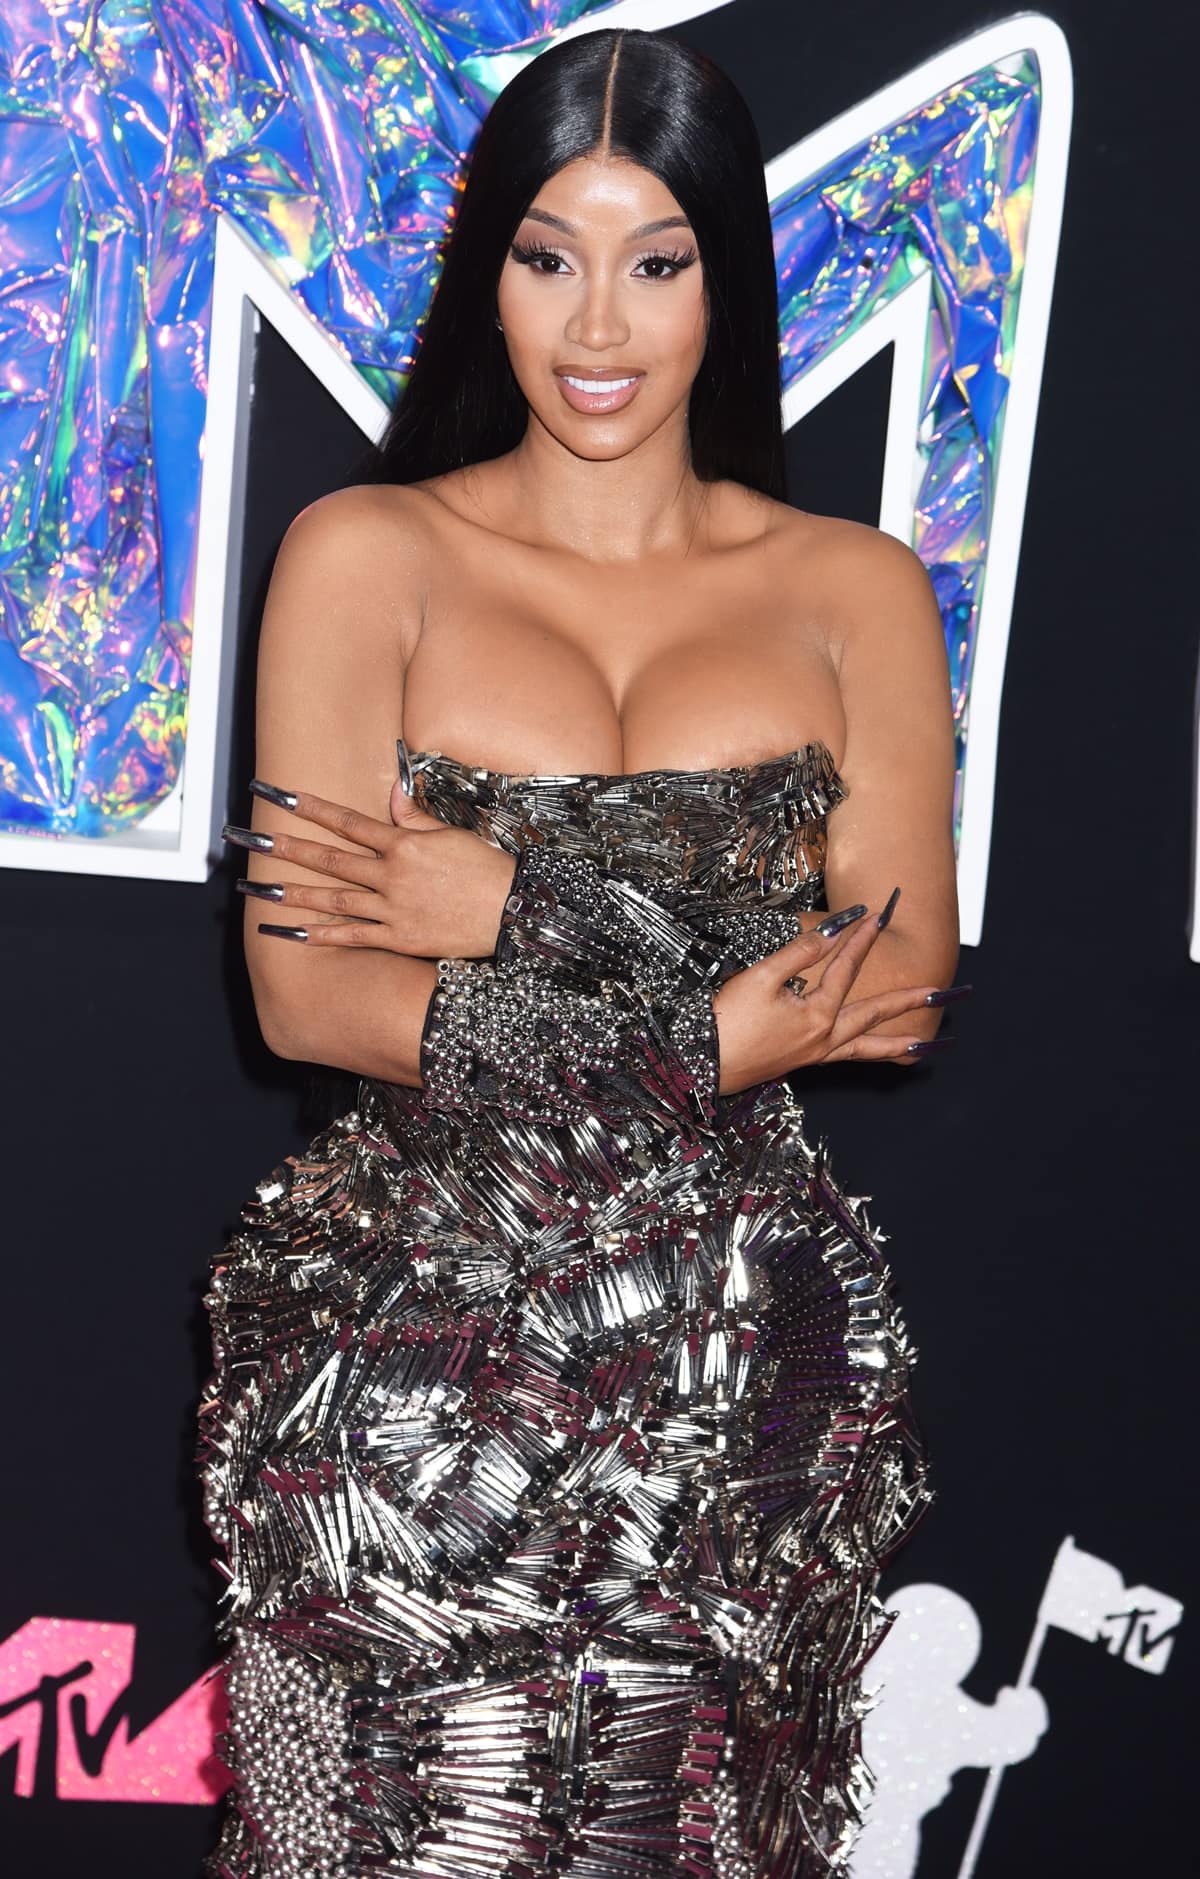 A closer look at Cardi B's dress revealed an intricate design crafted from hundreds of silver hair clips arranged in captivating swirls and fan-like patterns